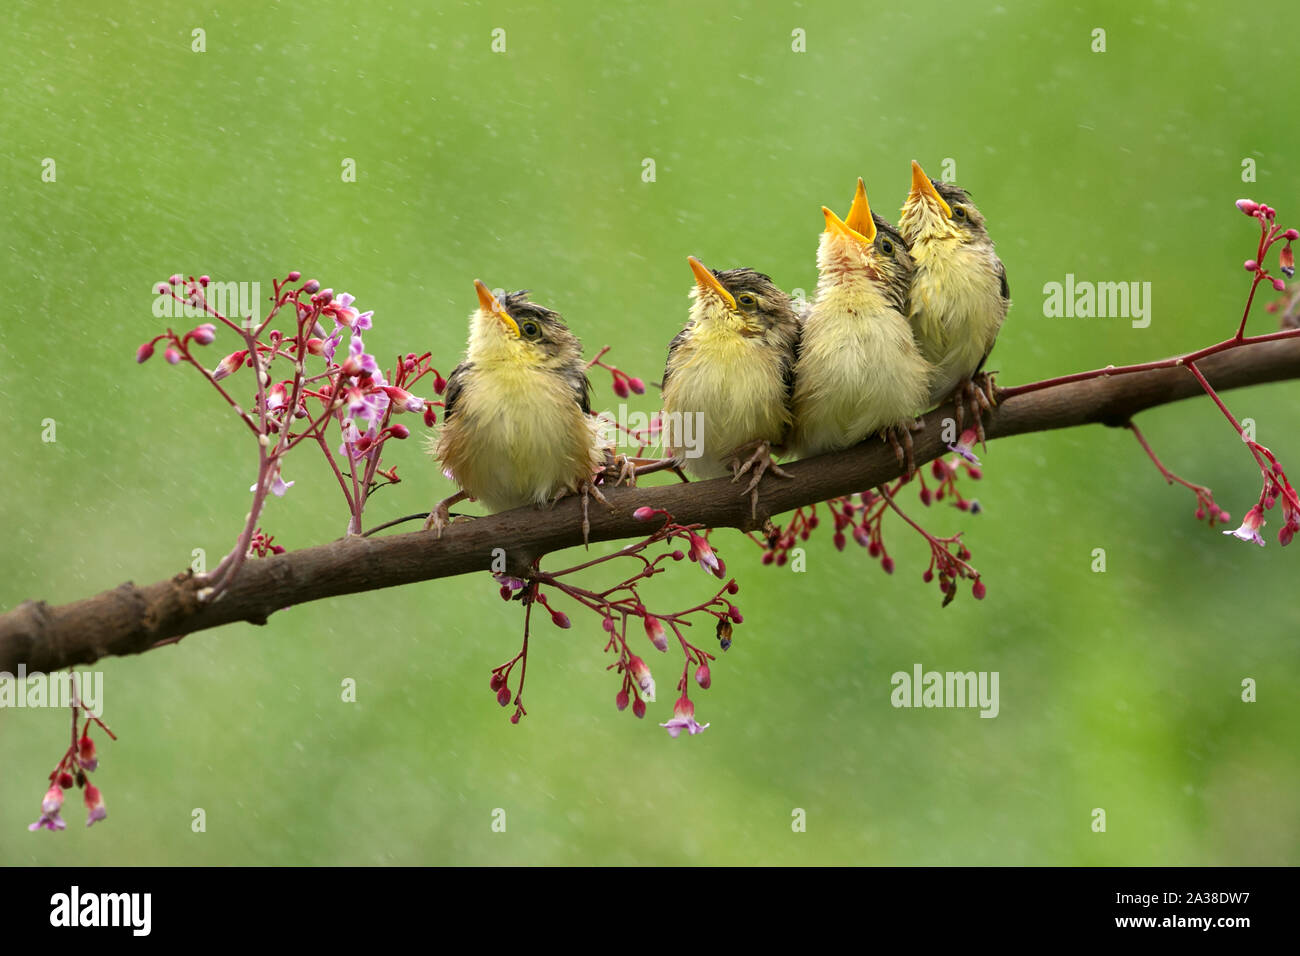 Four birds sitting on a branch, Indonesia Stock Photo